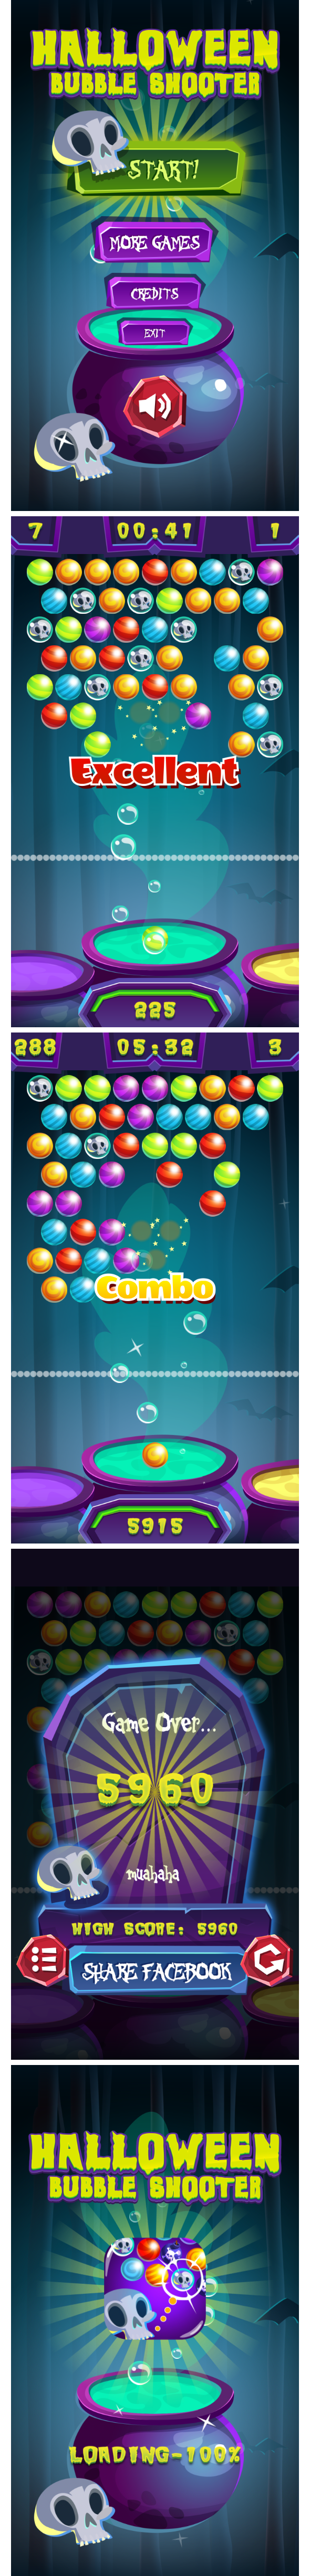 Halloween Bubble Shooter - HTML5 Game, Mobile Version+AdMob!!! (Construct 3 | Construct 2 | Capx) - 1